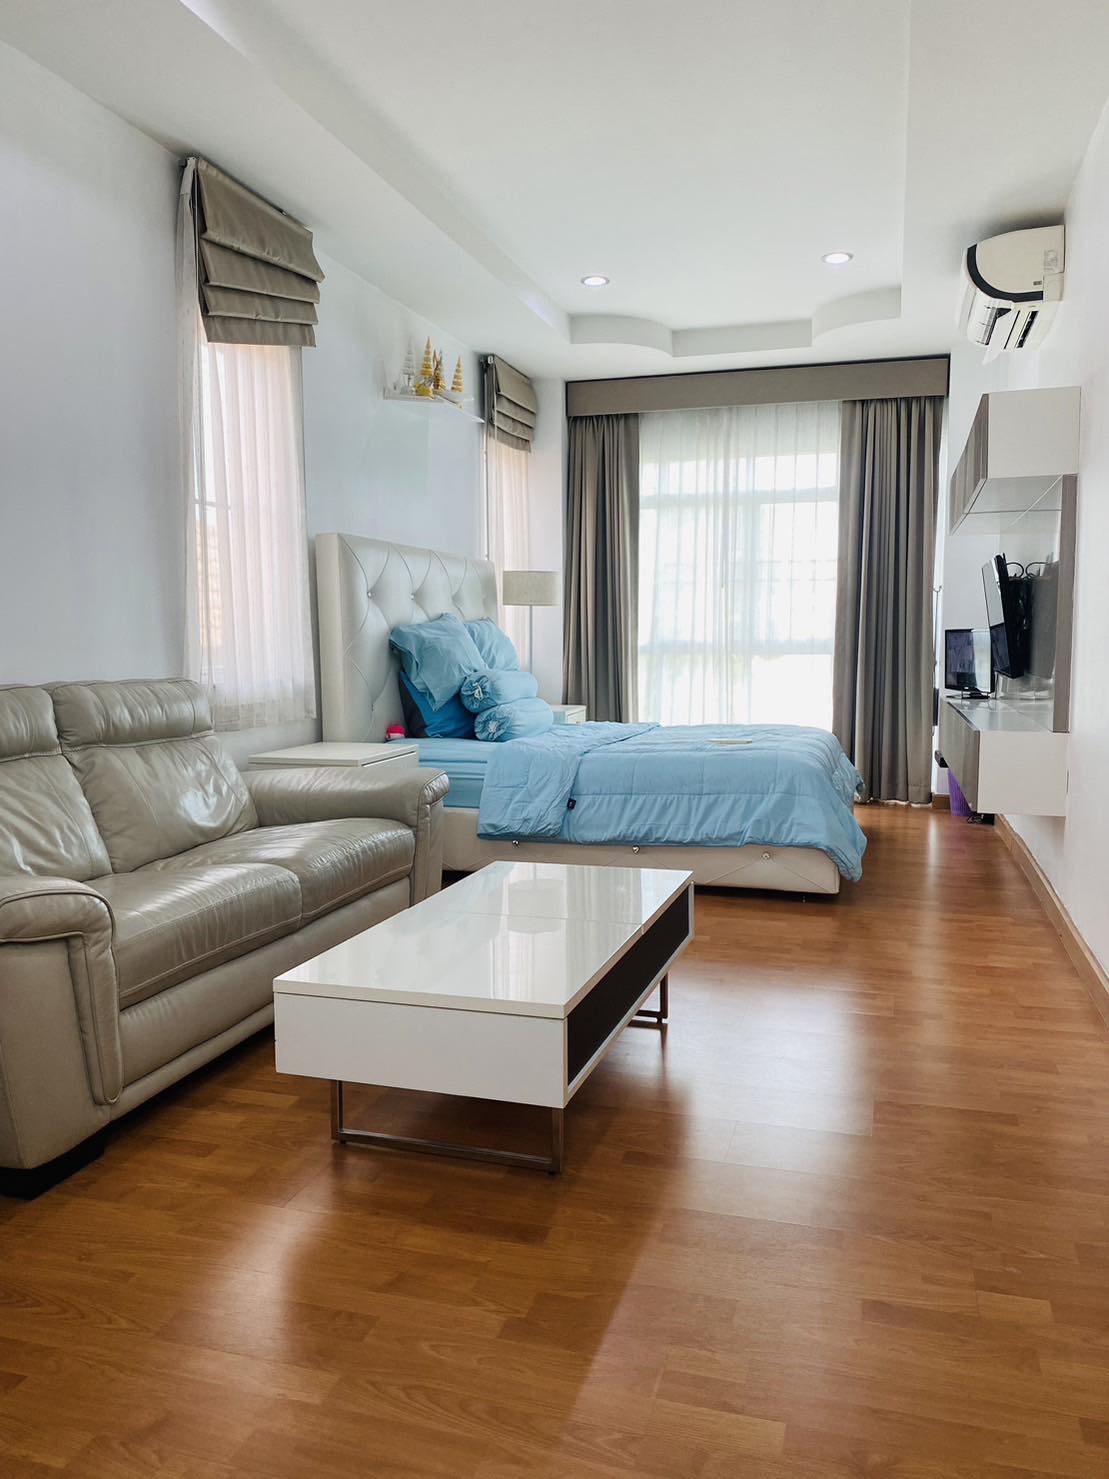 Pool Villa with 3 bedrooms in the village in Central Pattaya. Pattaya Lagoon Village (Phase 3)